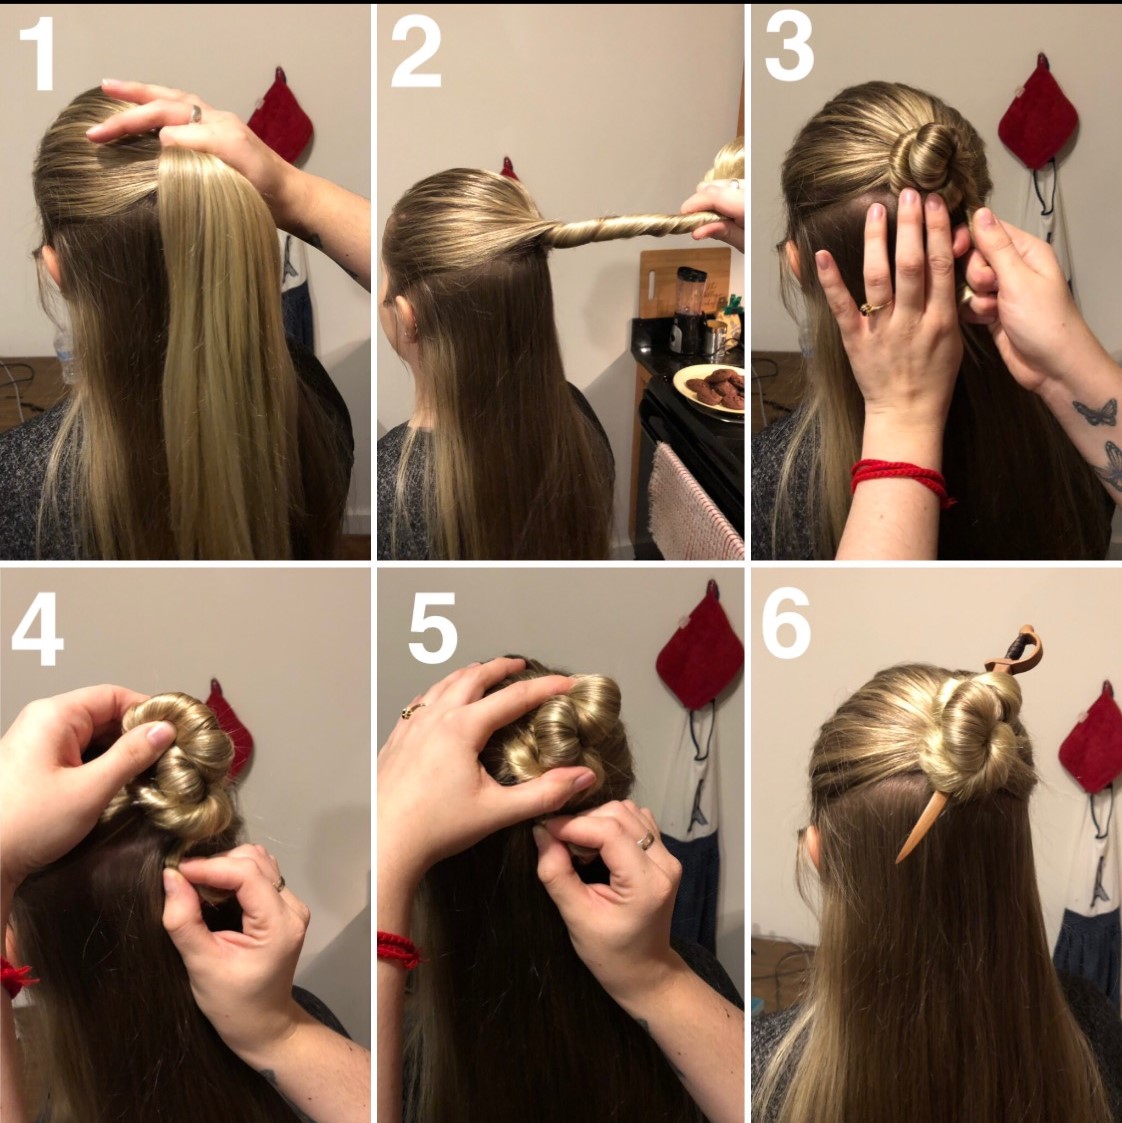 Hair stick tutorial: an easy, trendy alternative to styling long hair –  Northern Star